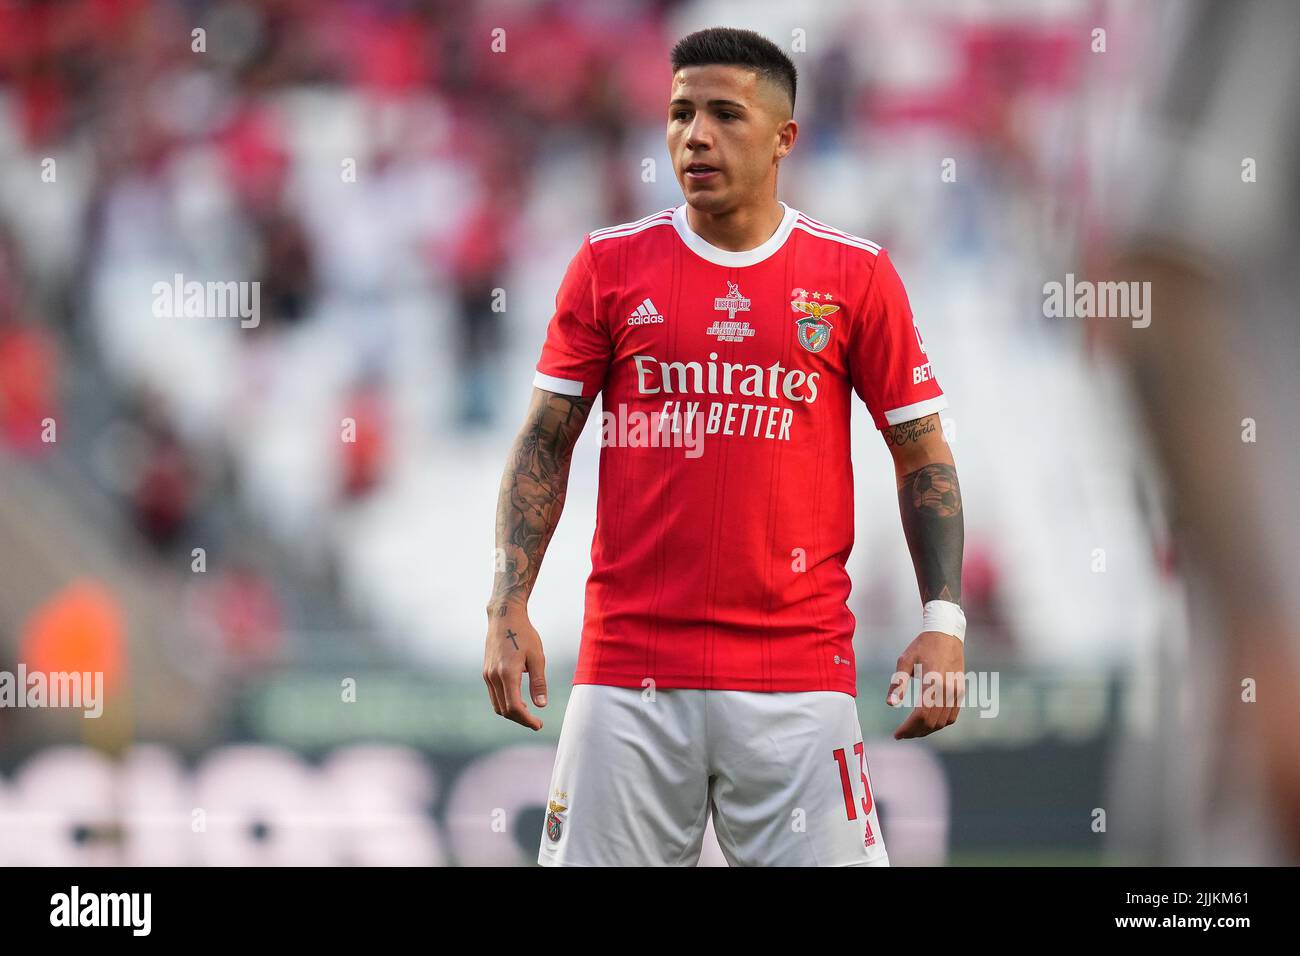 Lisbon, Portugal. July 25, 2022, Enzo Fernandez of Benfica during the Pre-Season Friendly Eusebio Cup match between SL Benfica and Newcastle United FC played at Estadio da Luz on July 25, 2022 in Lisbon, Portugal. (Photo by Bagu Blanco / PRESSINPHOTO) Stock Photo